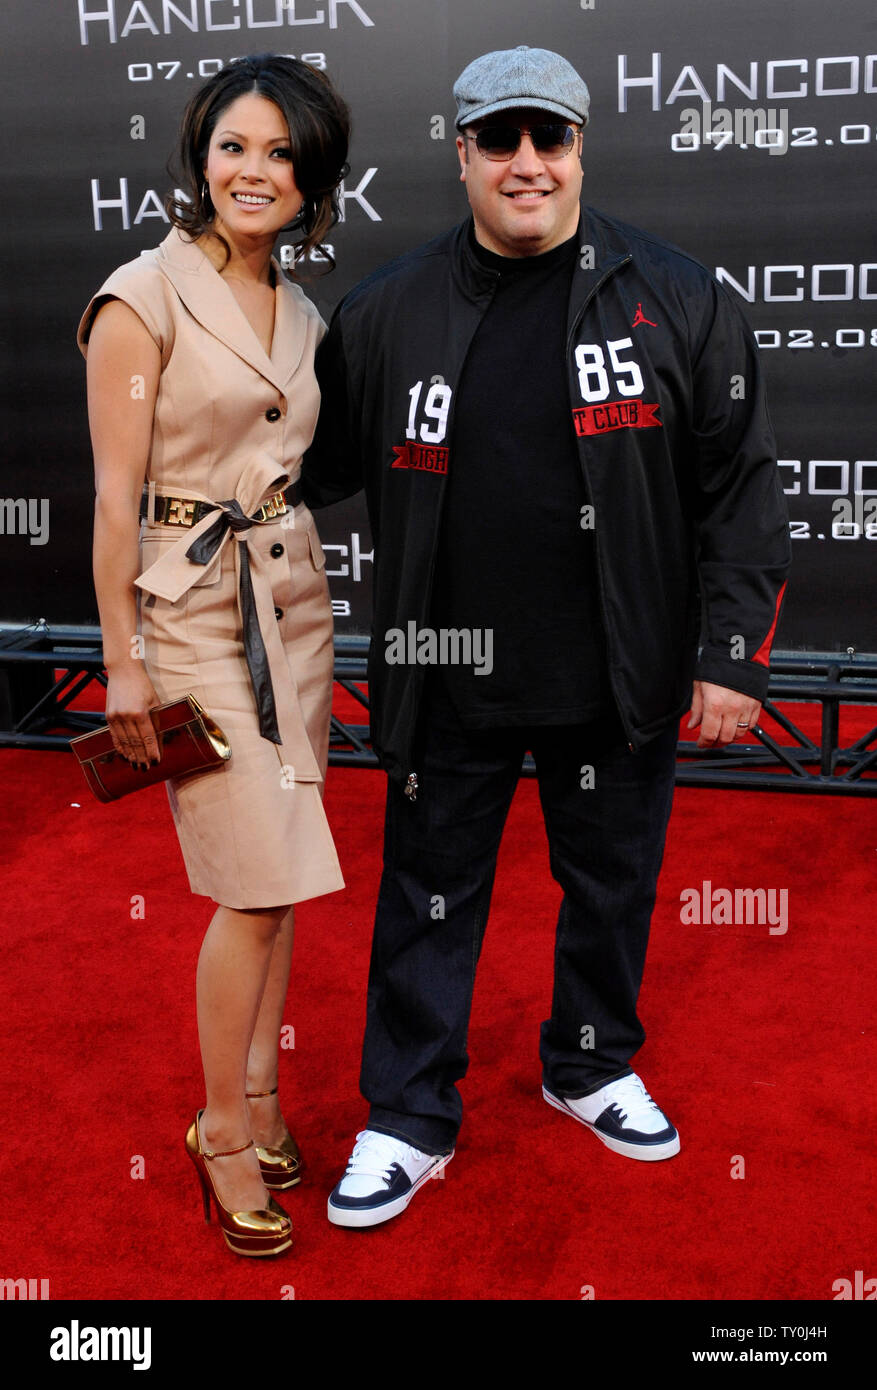 Actor Kevin James and his wife Steffiana De La Cruz attend the premiere of the motion picture fantasy adventure "Hancock", at Grauman's Chinese Theatre in the Hollywood section of Los Angeles on June 30, 2008. (UPI Photo/Jim Ruymen) Stock Photo